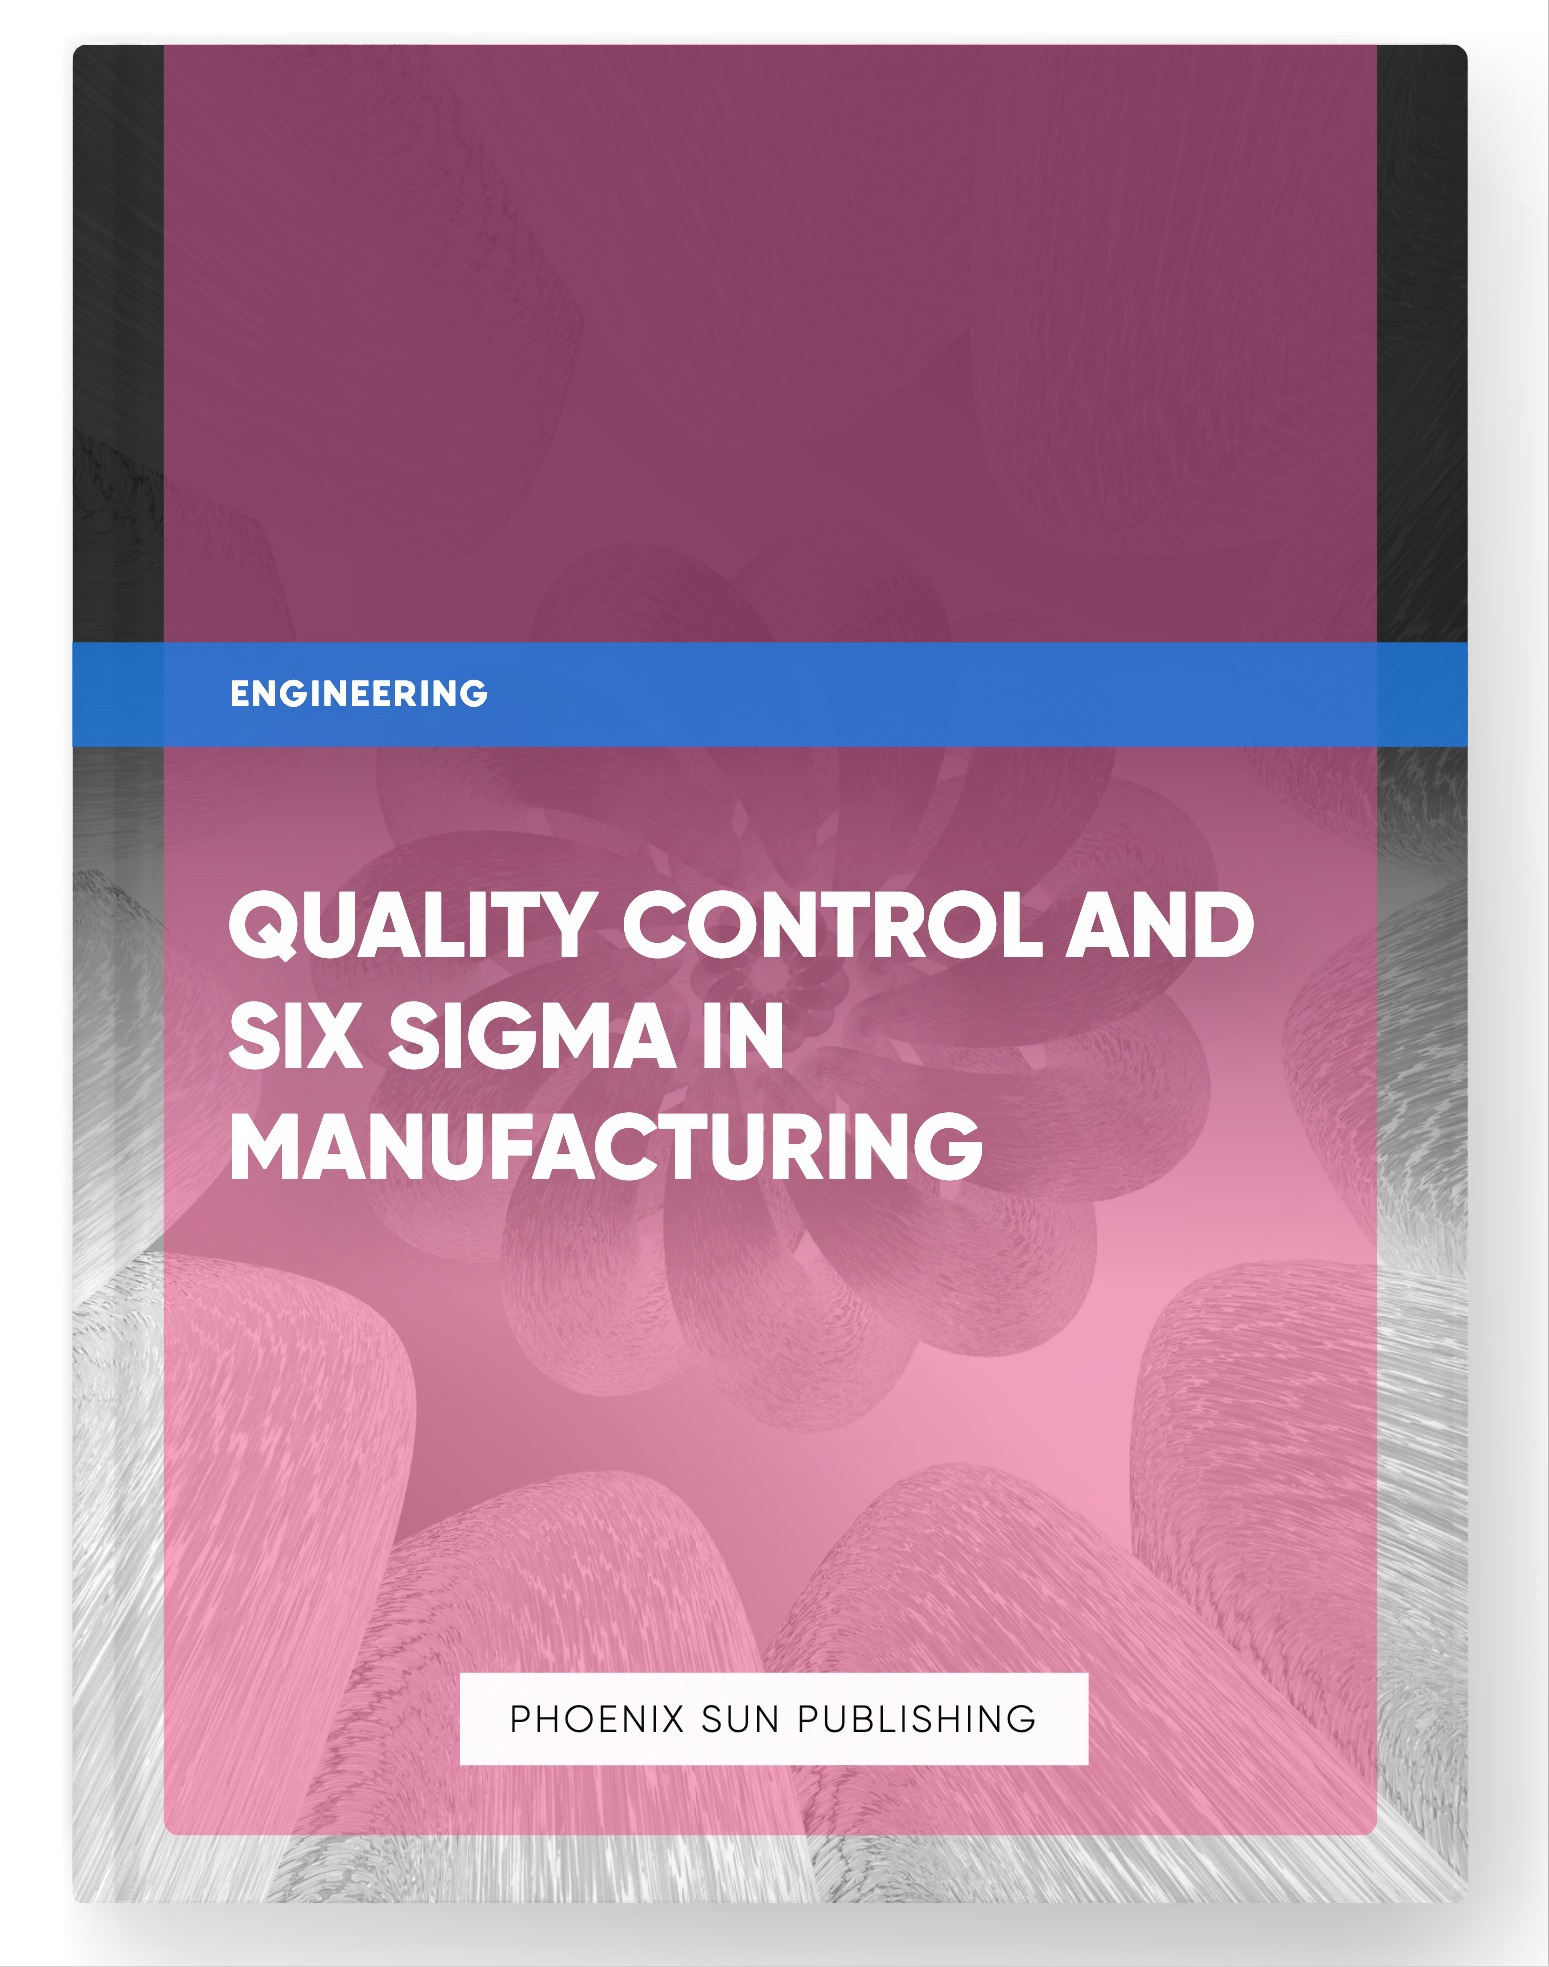 Quality Control and Six Sigma in Manufacturing